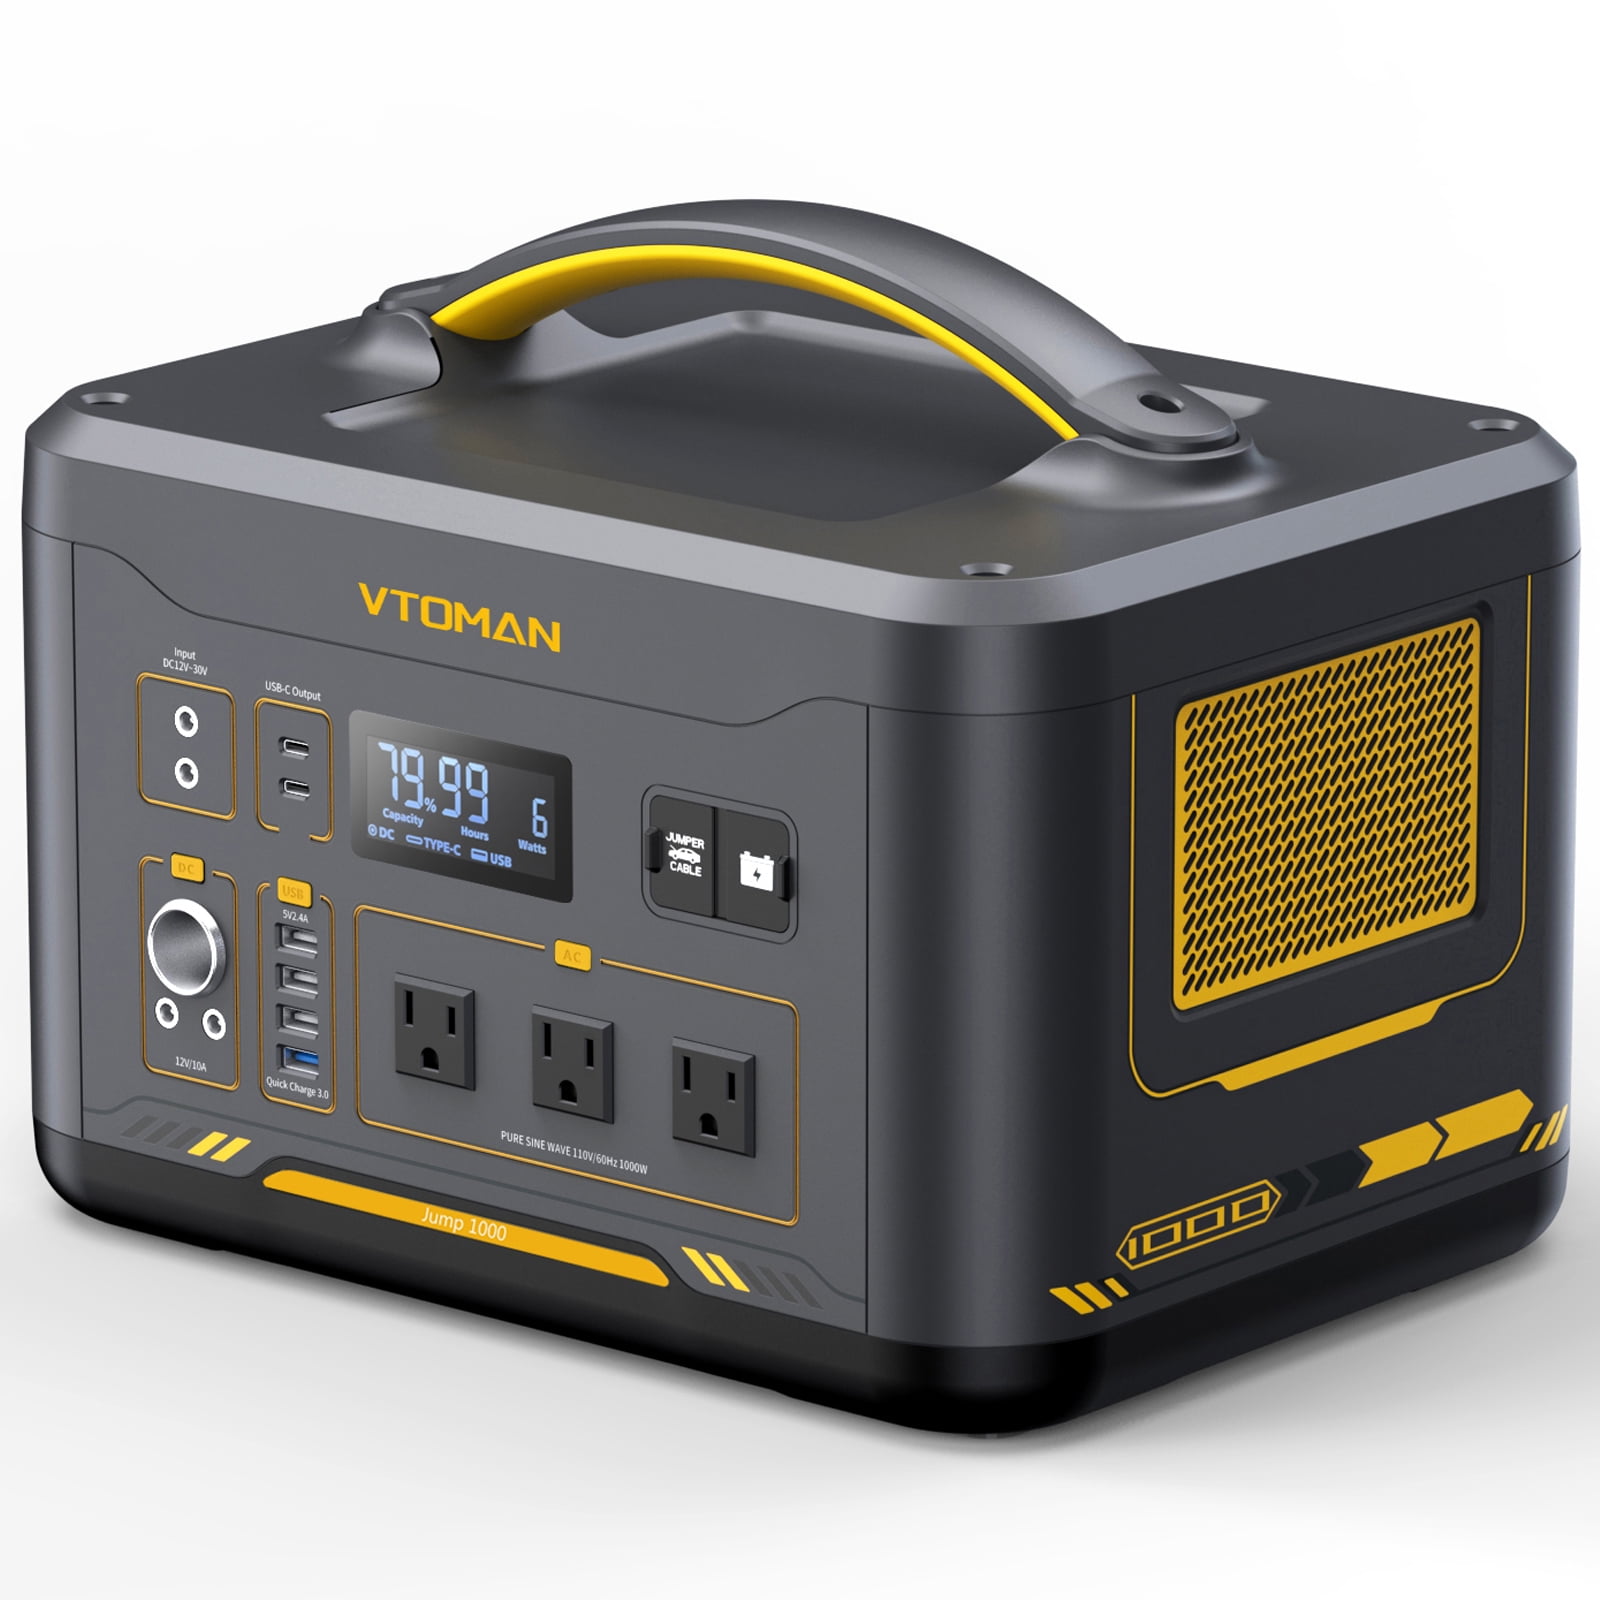 VTOMAN Portable Power Station 1000W Jump 1000 ,Solar Generator 1408Wh LiFePO4 Battery with 110V/1000W AC Outlets for Camping & Home Backup,RV - image 1 of 9